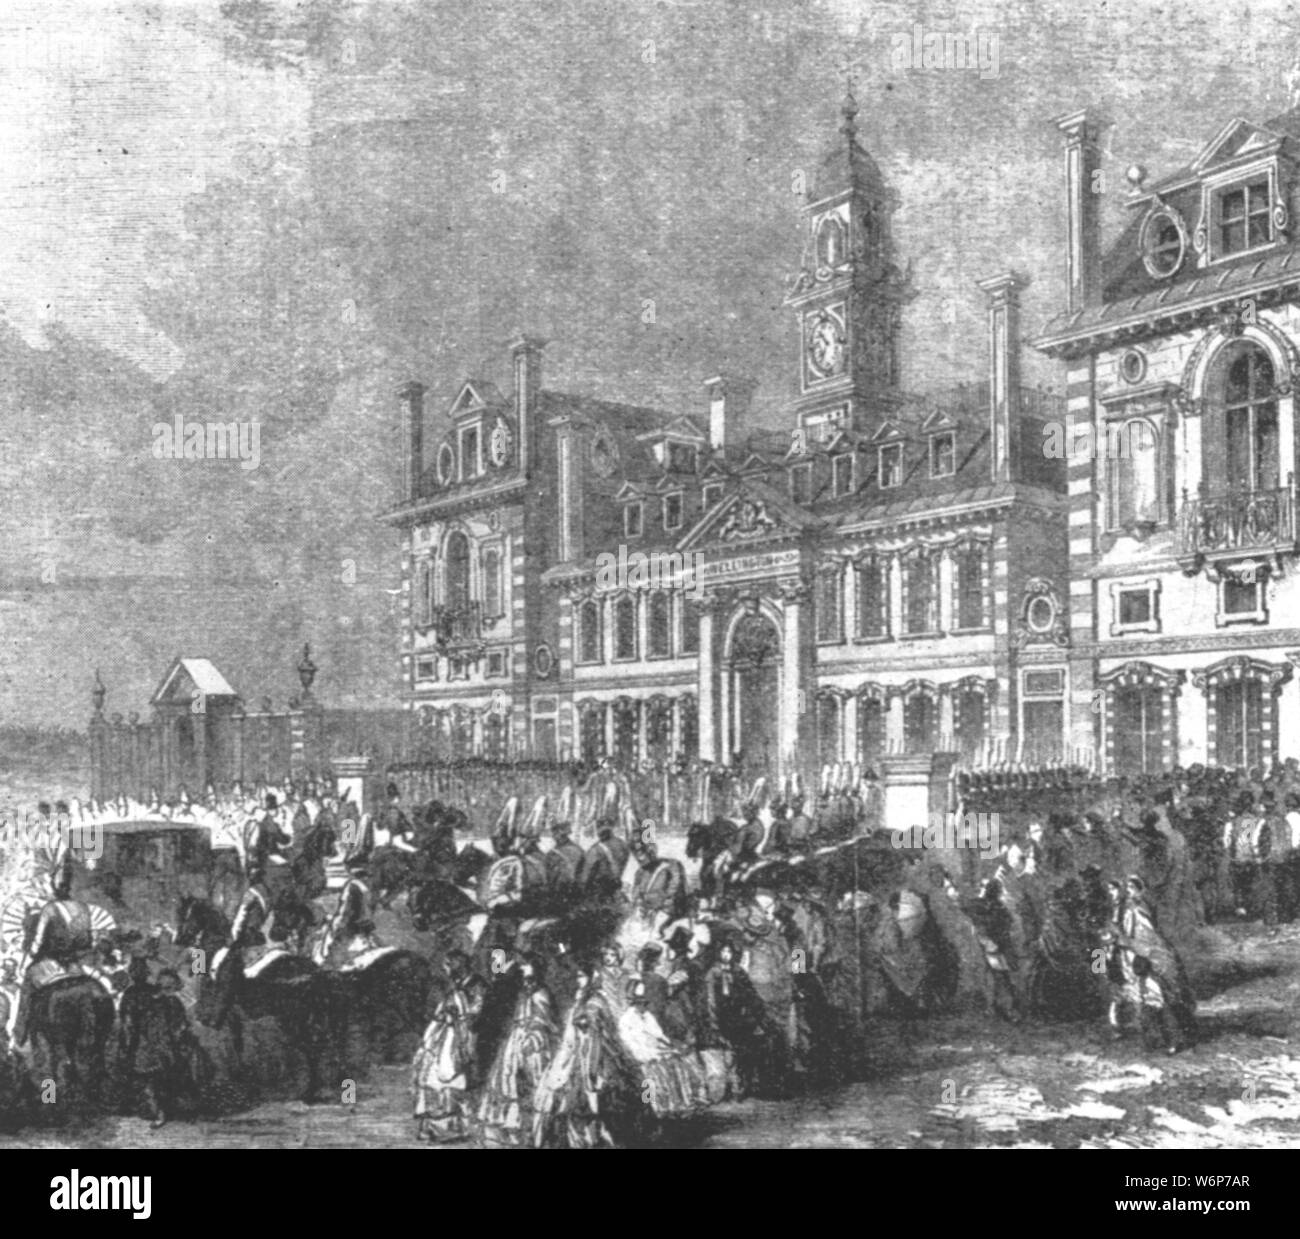 'Inauguration of Wellington College, Sandhurst: Arrival of Queen Victoria, January 29, 1859', (1901). Wellington College, a public school at Sandhurst in Berkshire, was founded by Queen Victoria and the Earl of Derby in 1859 as the national monument to the Duke of Wellington. From &quot;The Illustrated London News Record of the Glorious Reign of Queen Victoria 1837-1901: The Life and Accession of King Edward VII. and the Life of Queen Alexandra&quot;. [London, 1901] Stock Photo